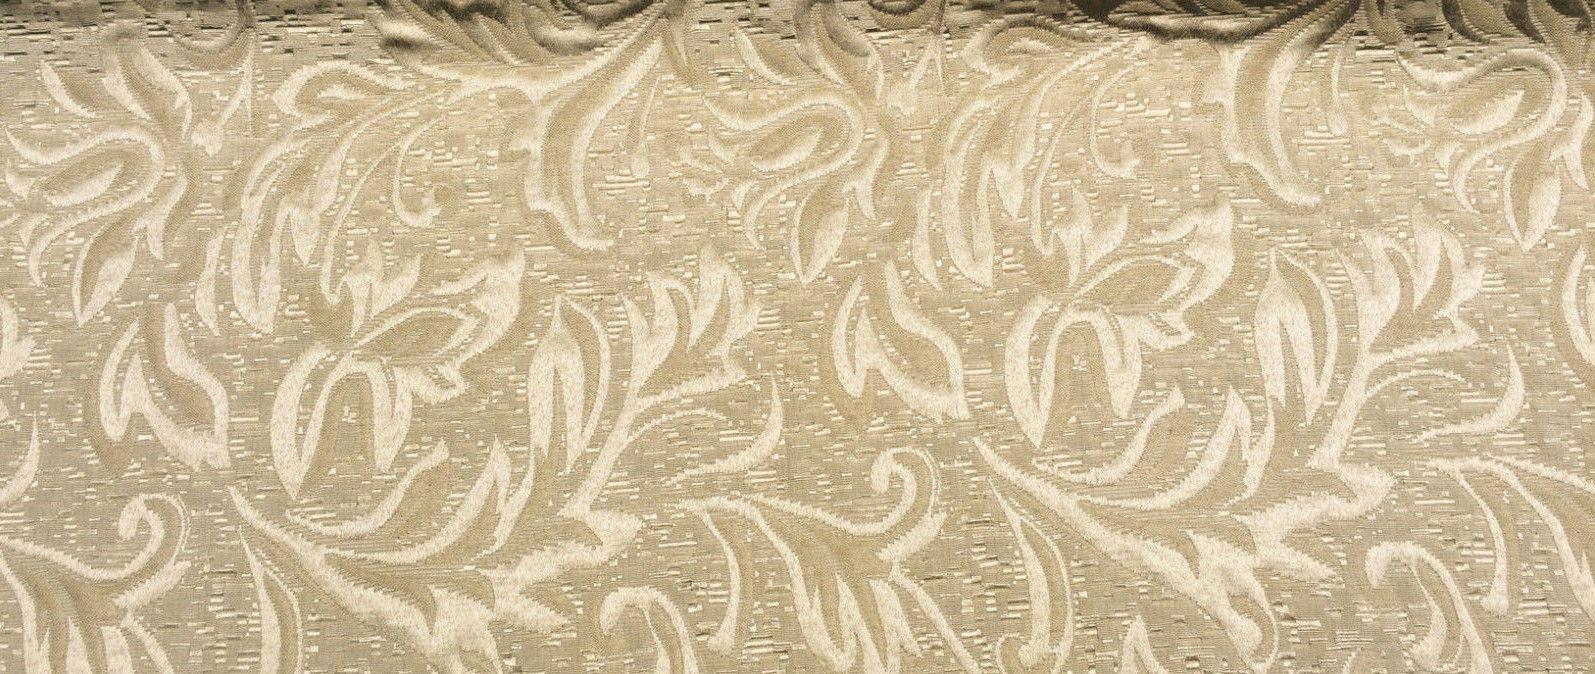 Gold, Solid Jacquard Woven Upholstery Grade Fabric By The Yard